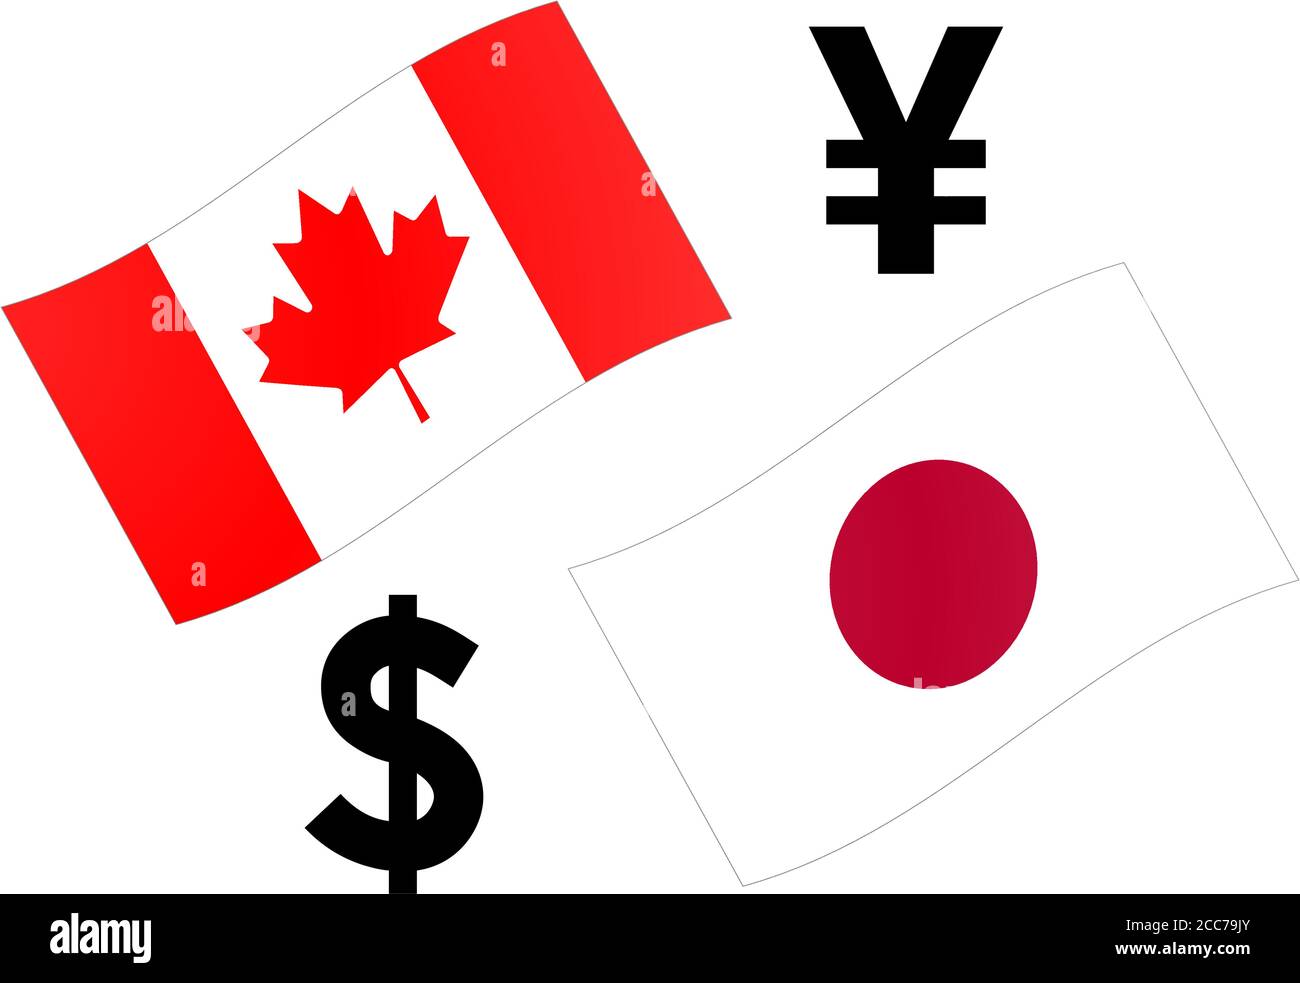 CADJPY forex currency pair vector illustration. Canadian and Japanese flag, with Dollar and Yen symbol. Stock Vector